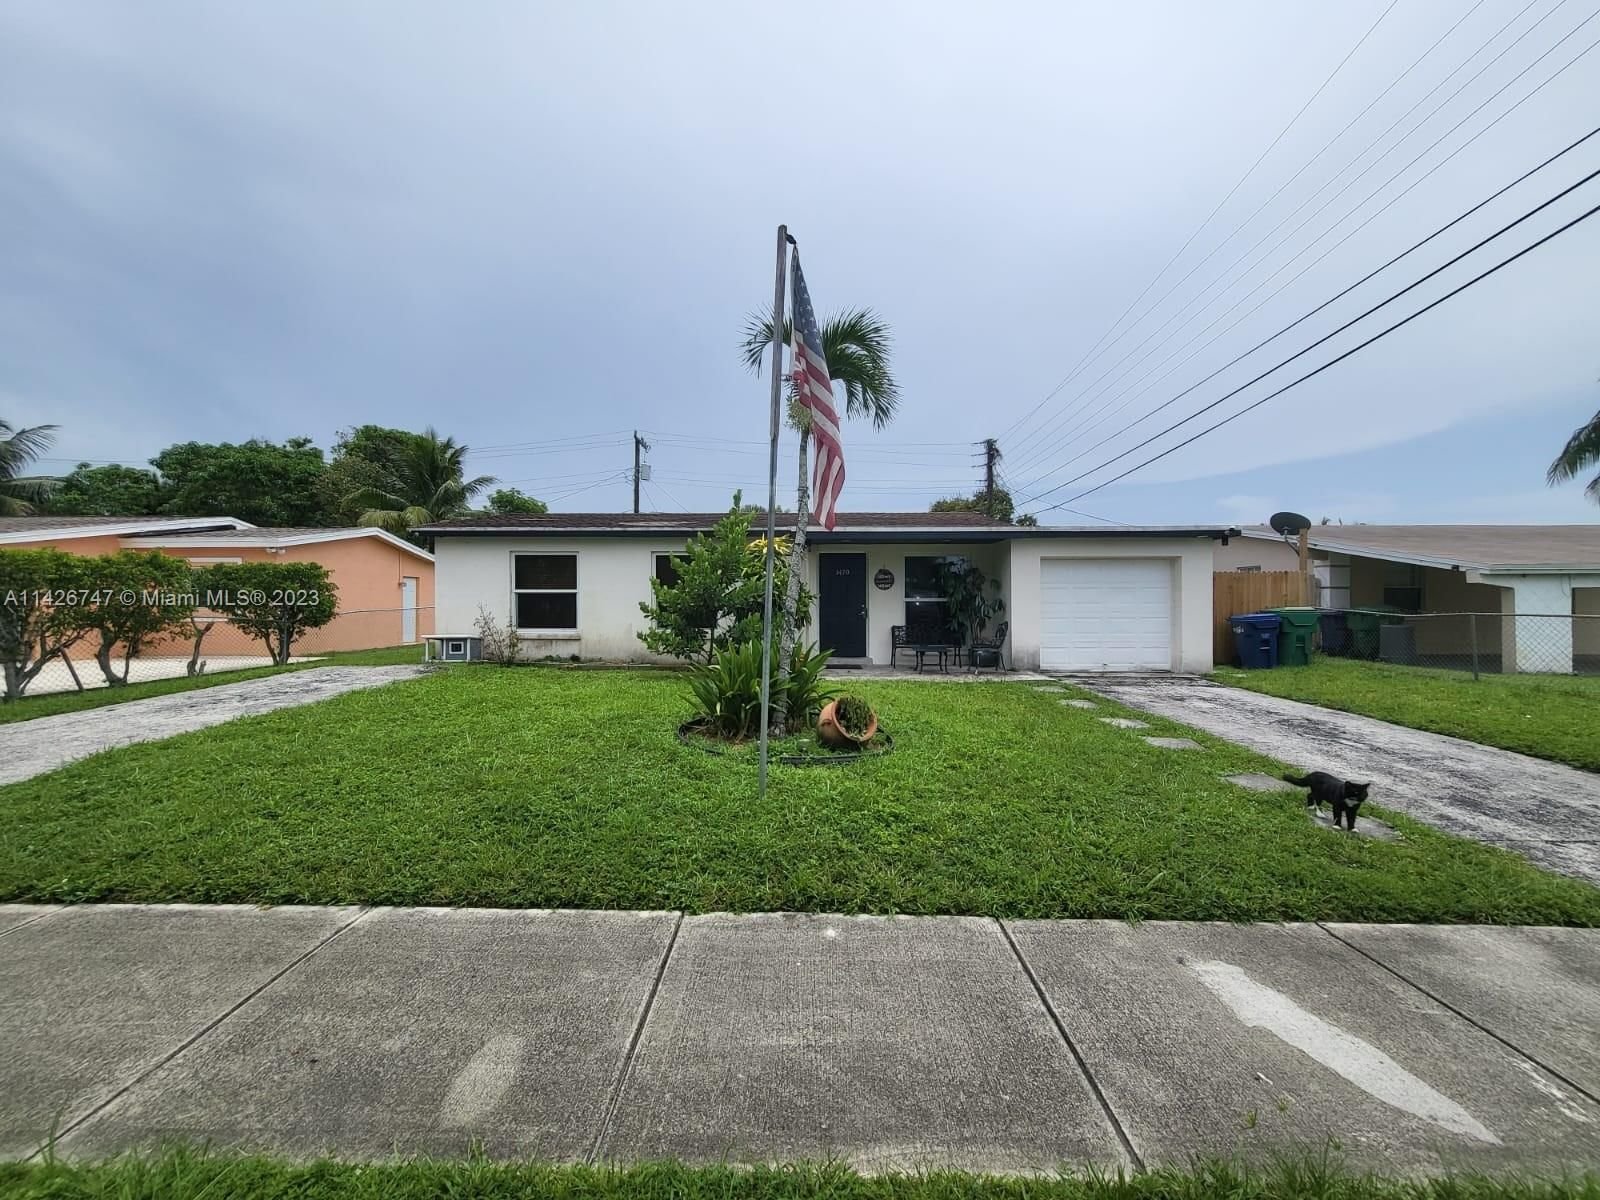 Real estate property located at 3470 18th St, Broward County, Lauderhill, FL